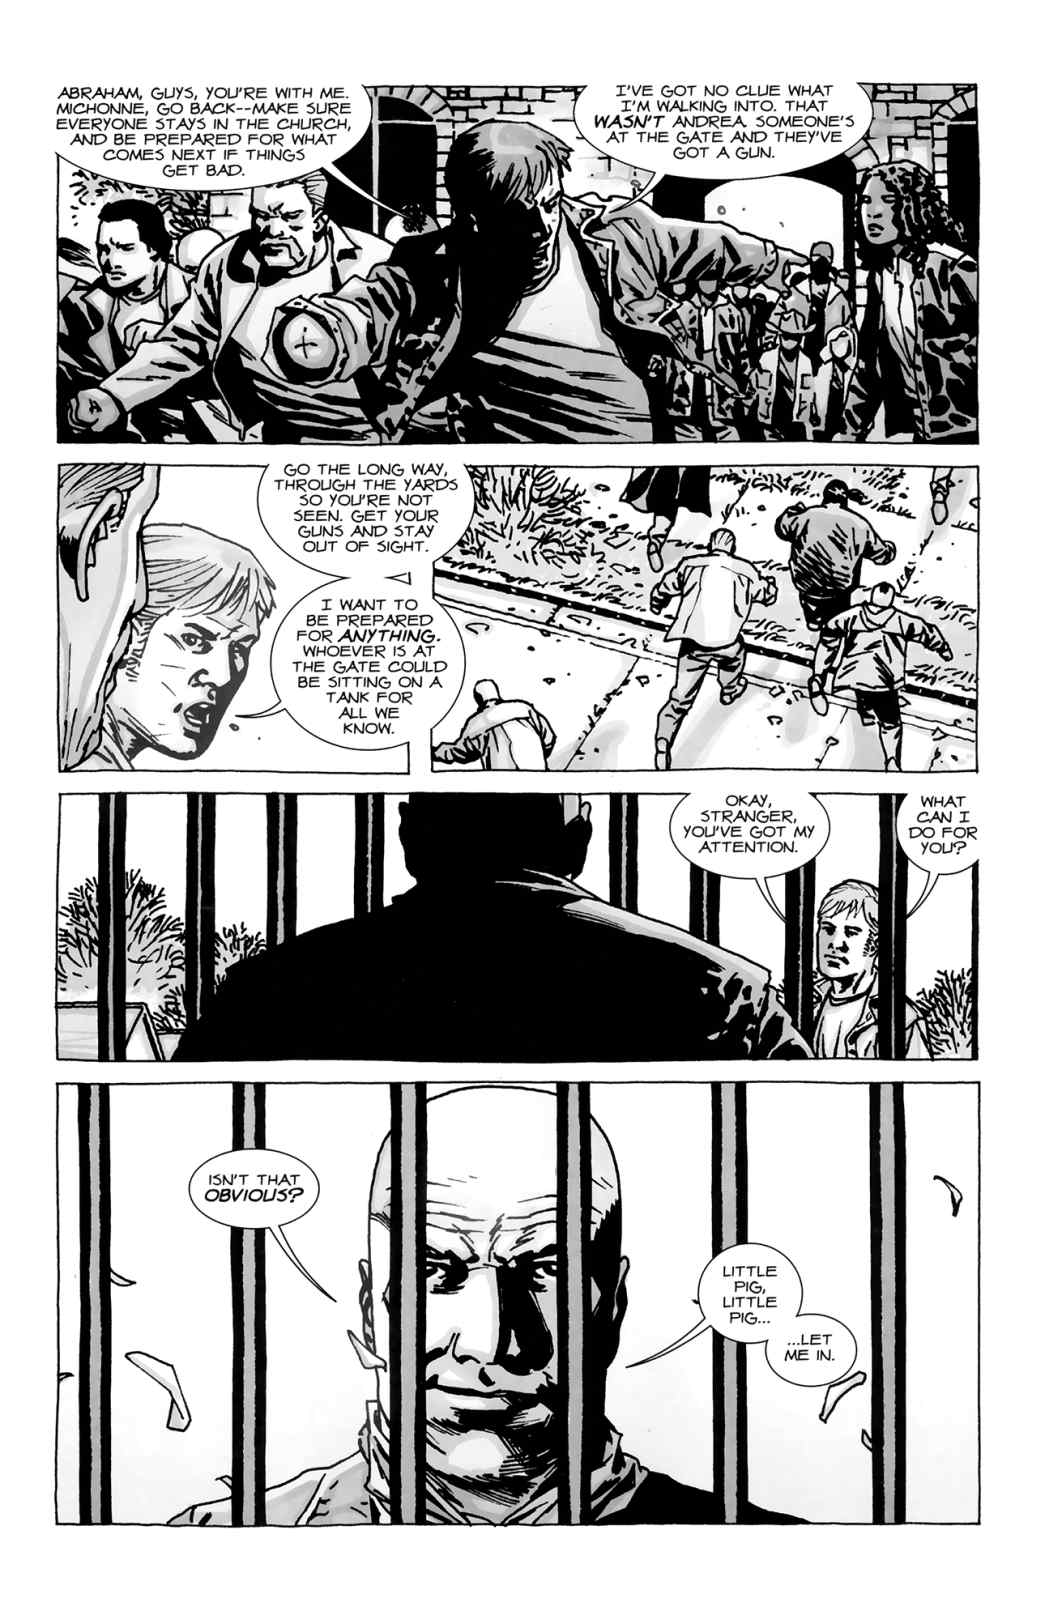 Read Comics Online Free The Walking Dead Comic Book Issue 078